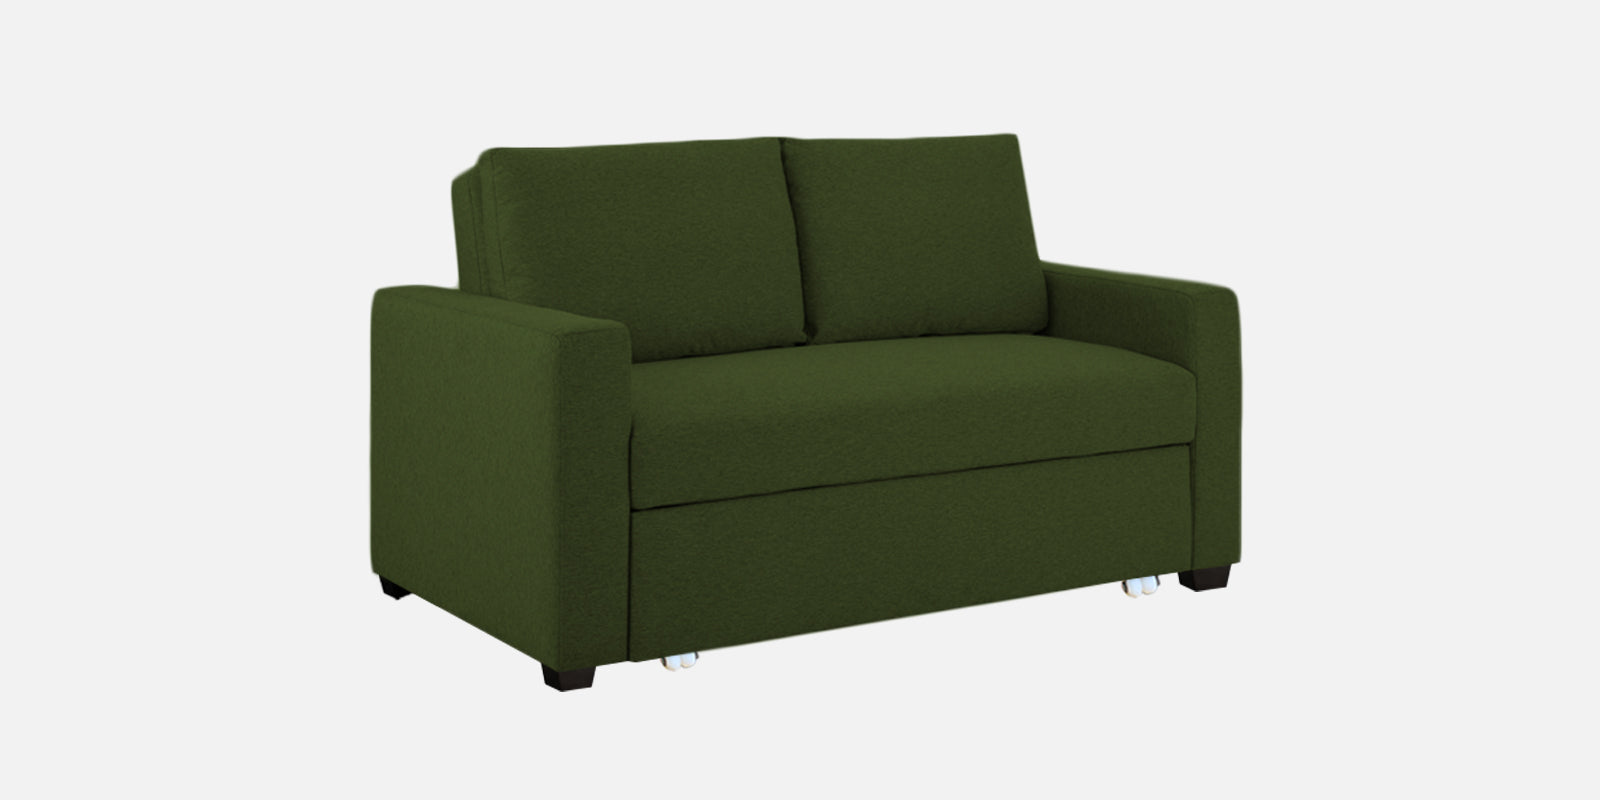 Lobby Fabric 2 Seater Pull Out Sofa Cum Bed In Olive Green Colour